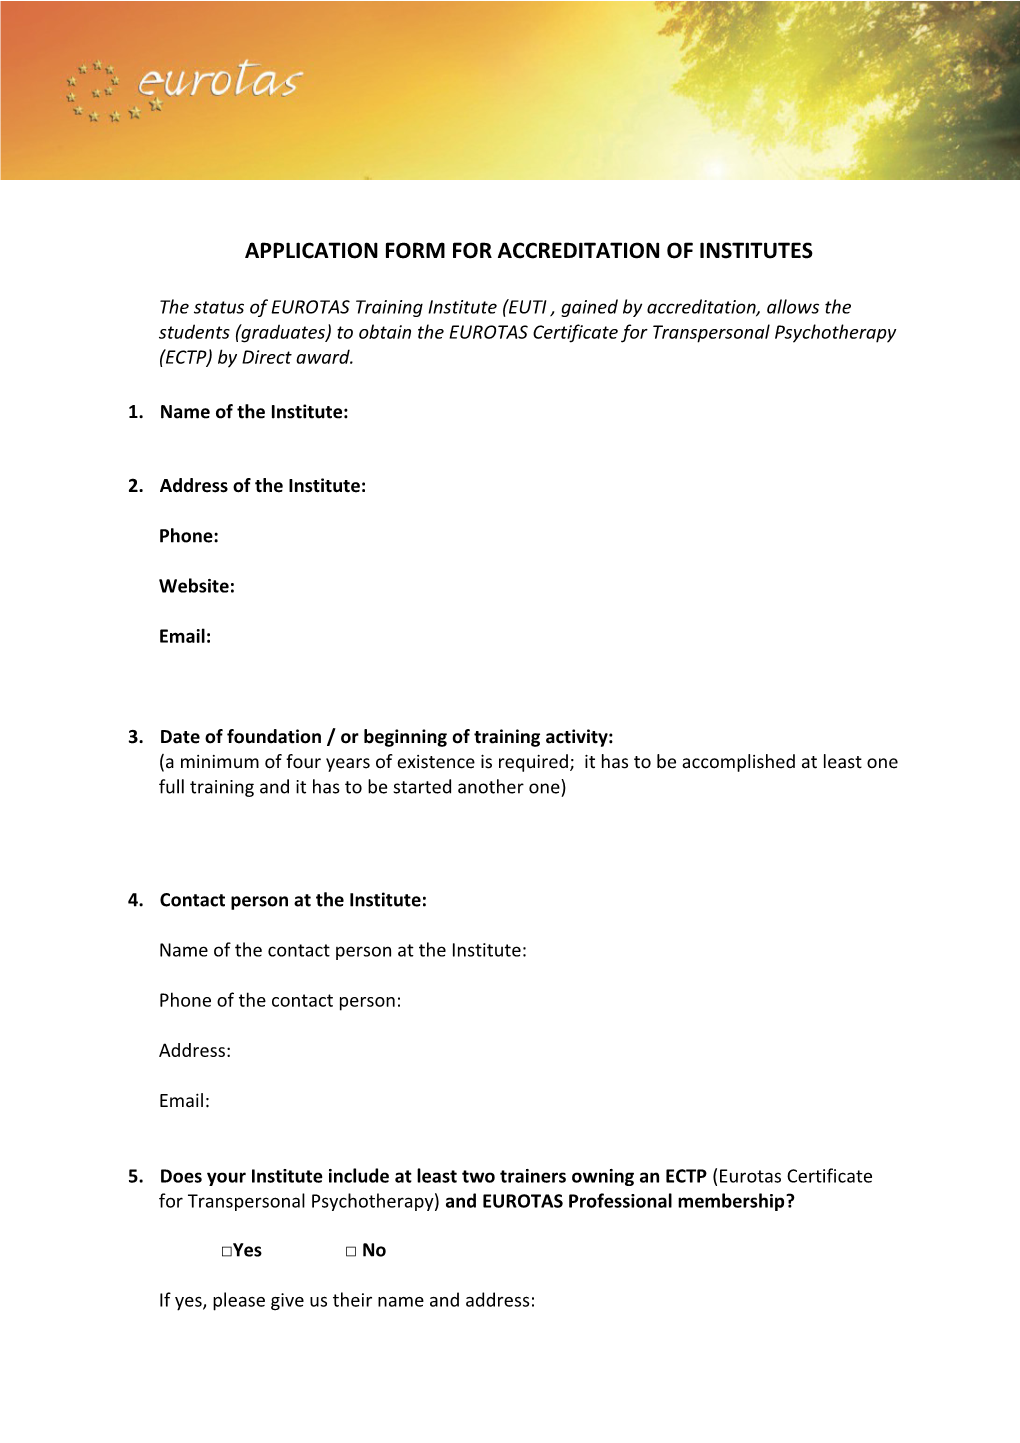 Application Form for Accreditation of Institutes